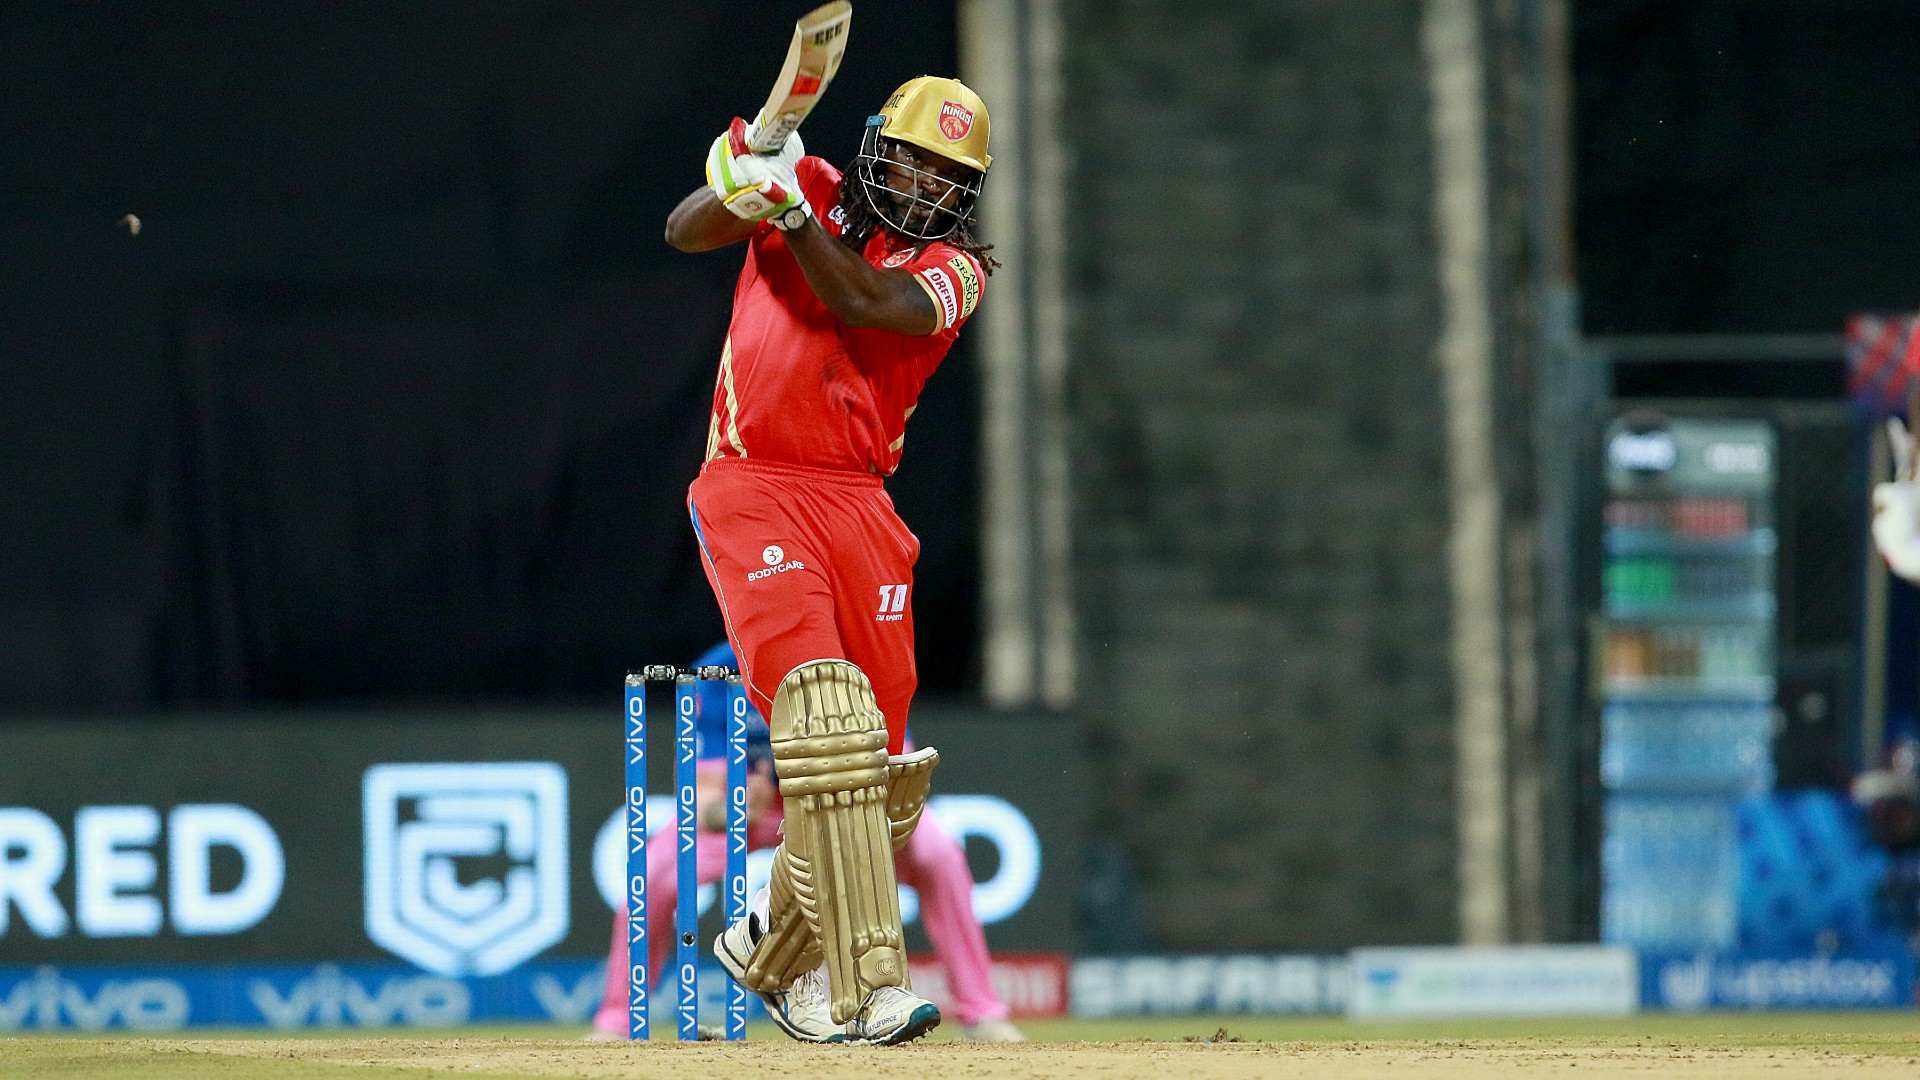 Chris Gayle in action. (Image Credit: Twitter/@IPL)